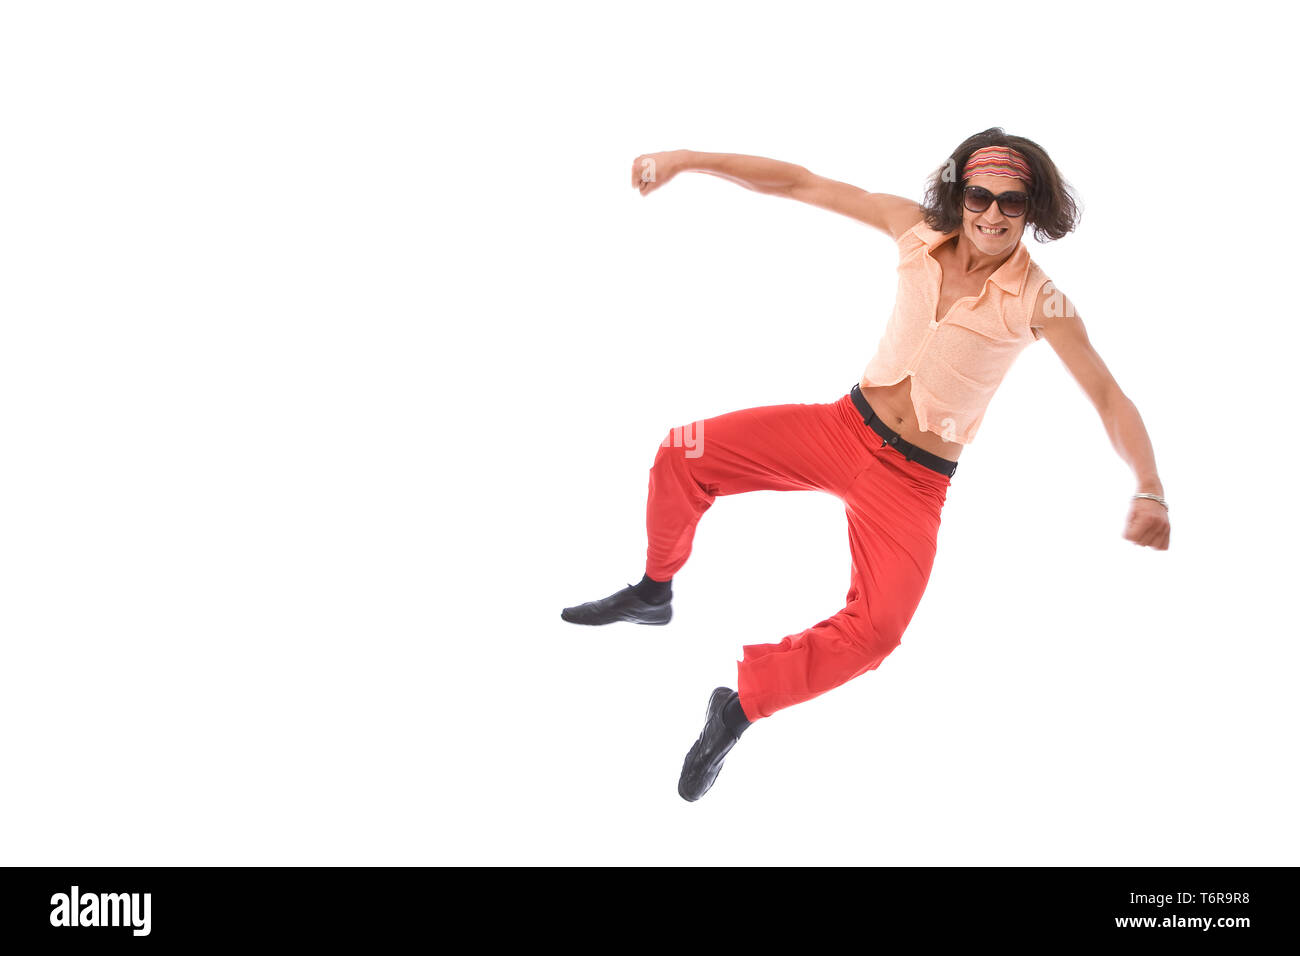 funny looking retro style man dancing on white background Stock Photo